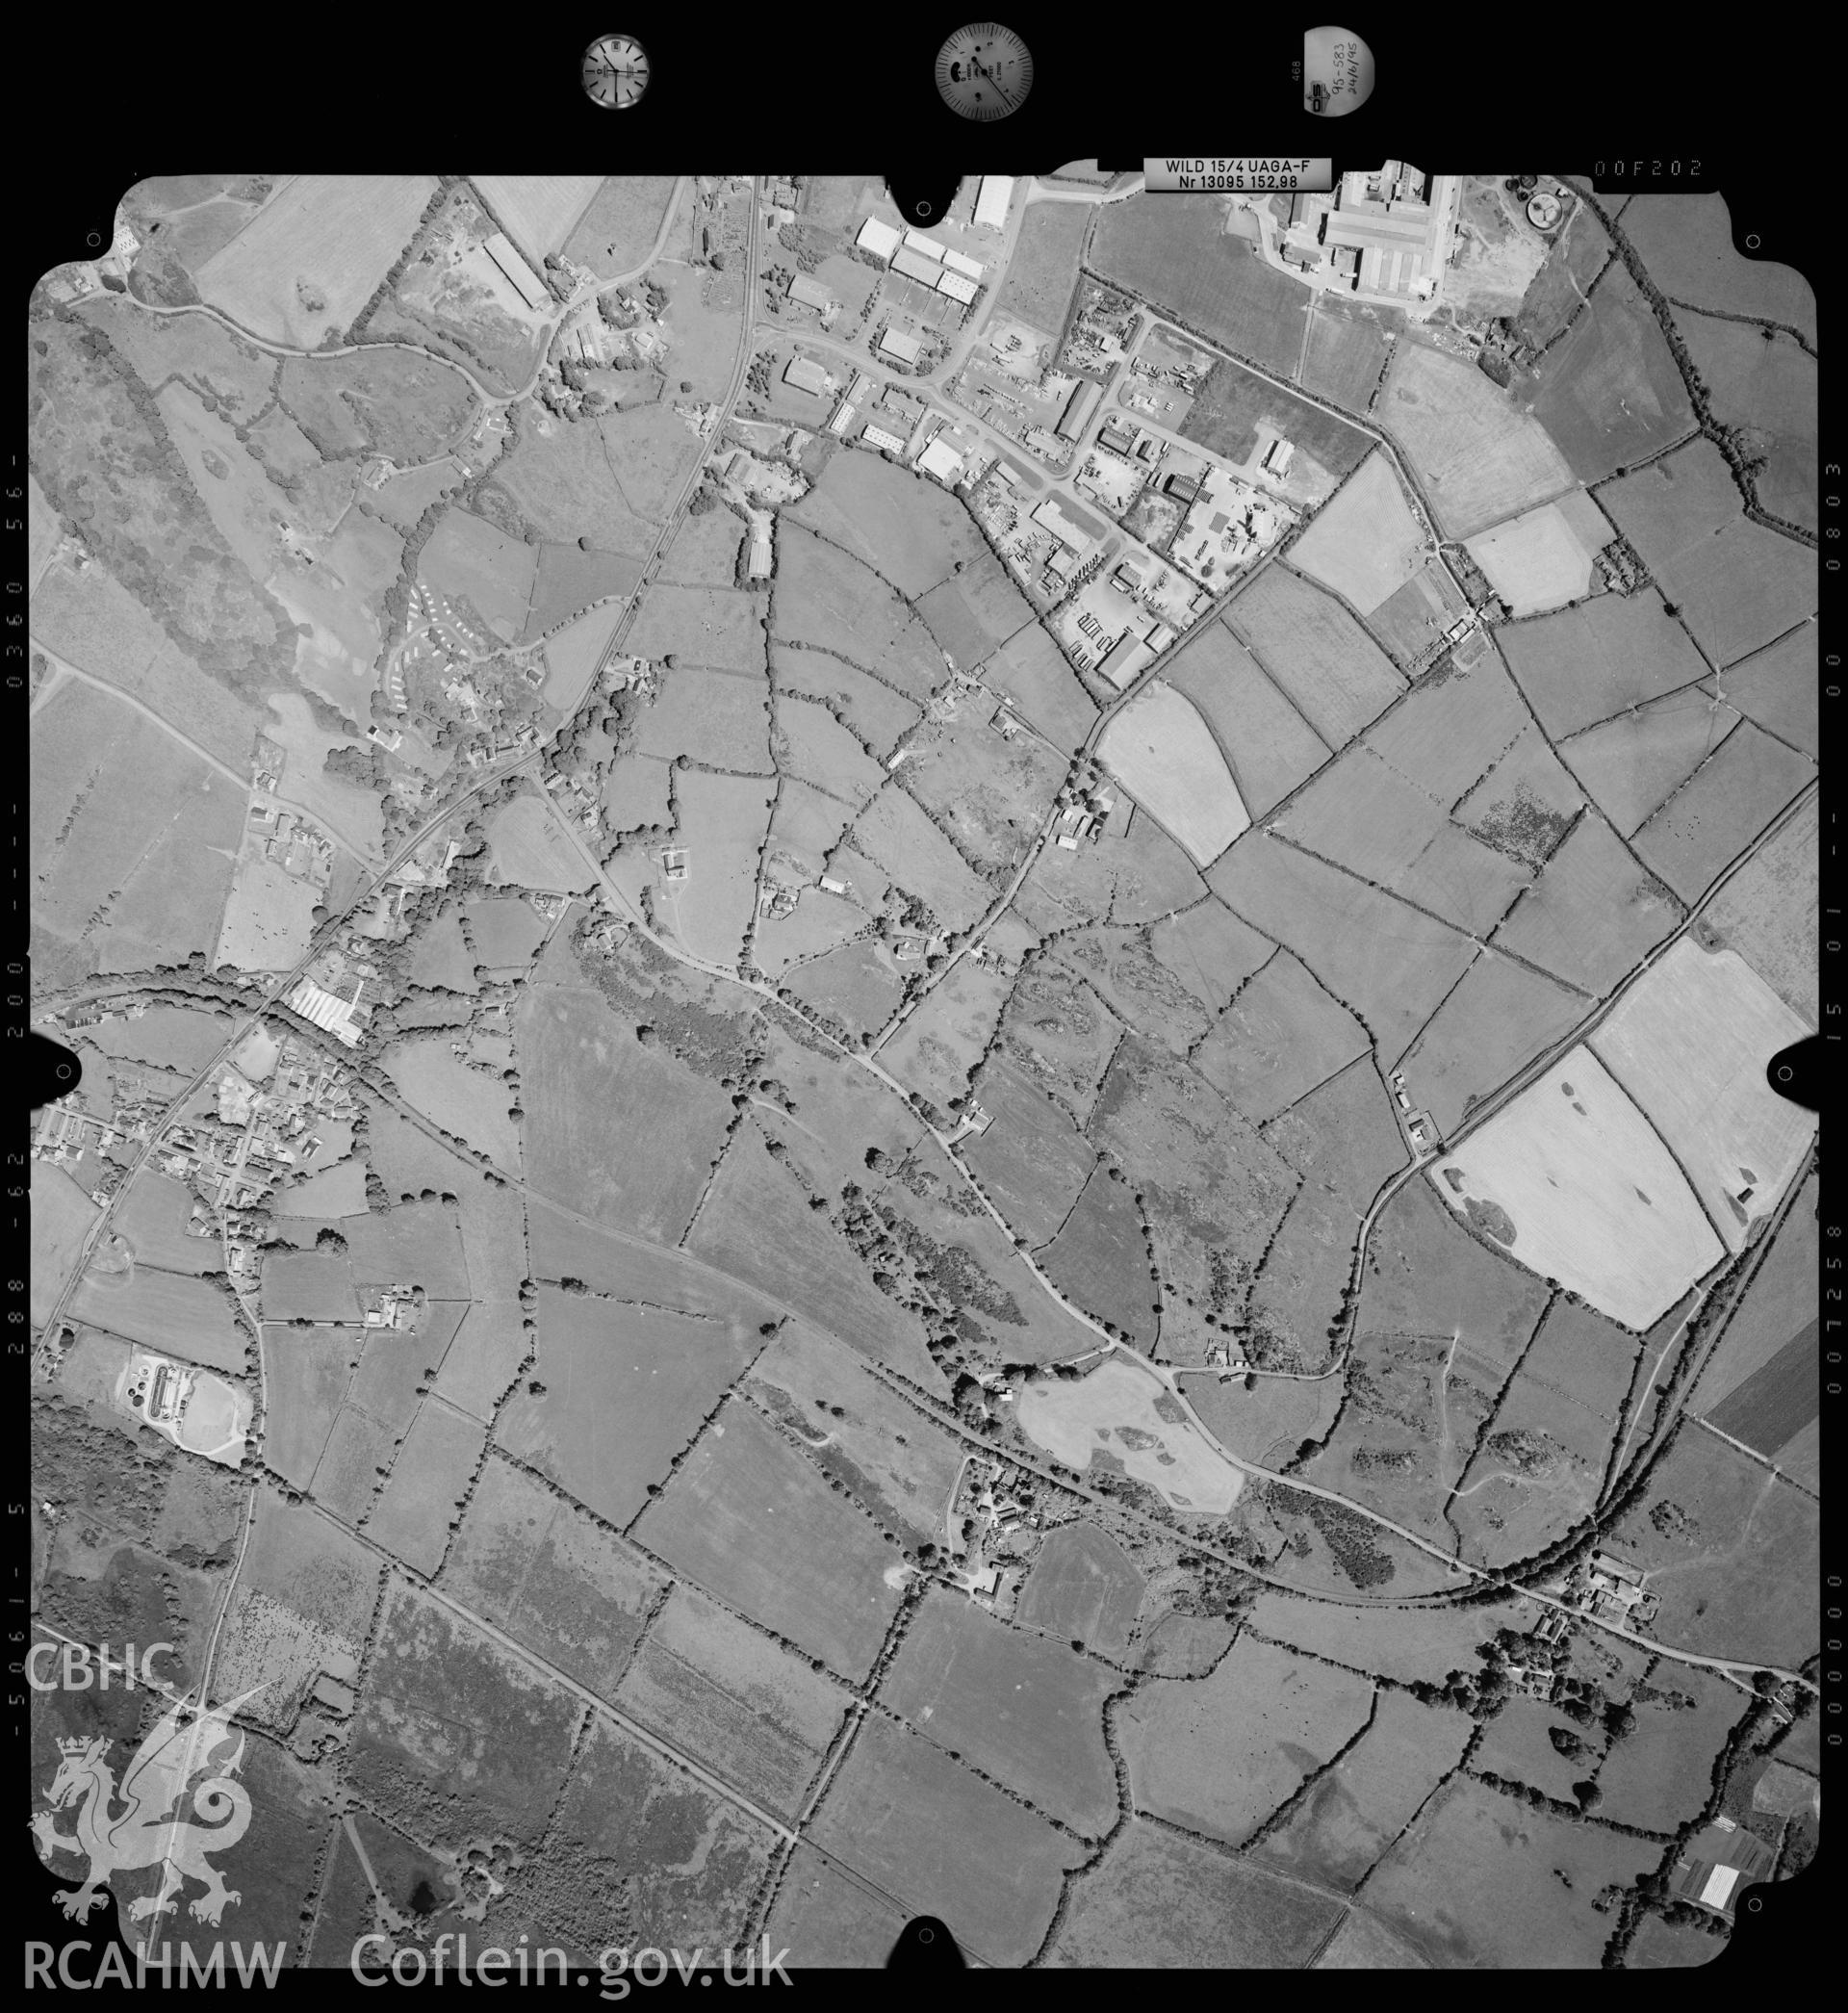 Digitized copy of an aerial photograph showing Llanfairpwll area, taken by Ordnance Survey, 1995.